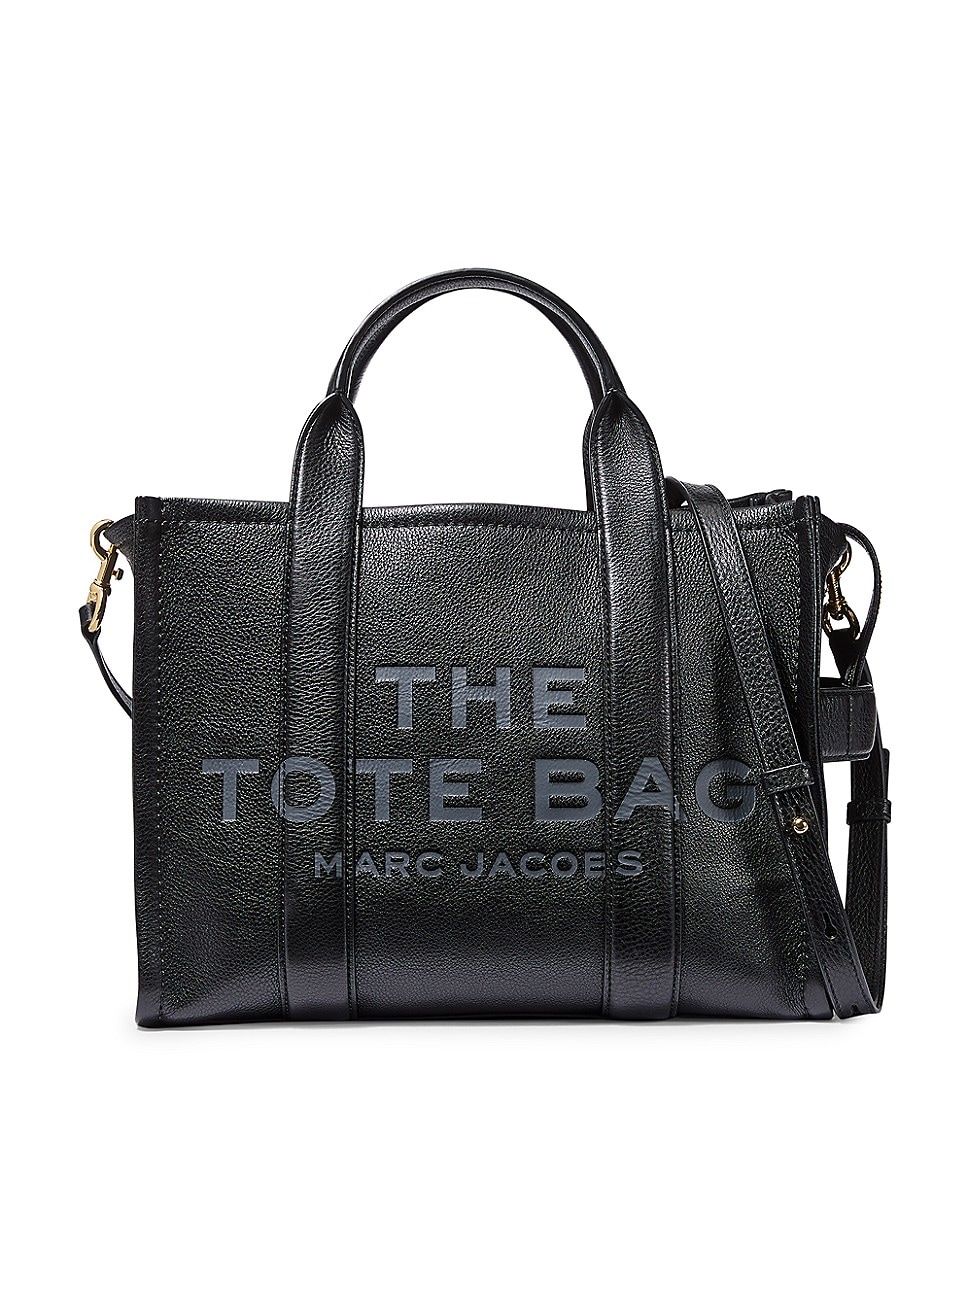 Marc Jacobs Small Traveler Leather Tote | Saks Fifth Avenue